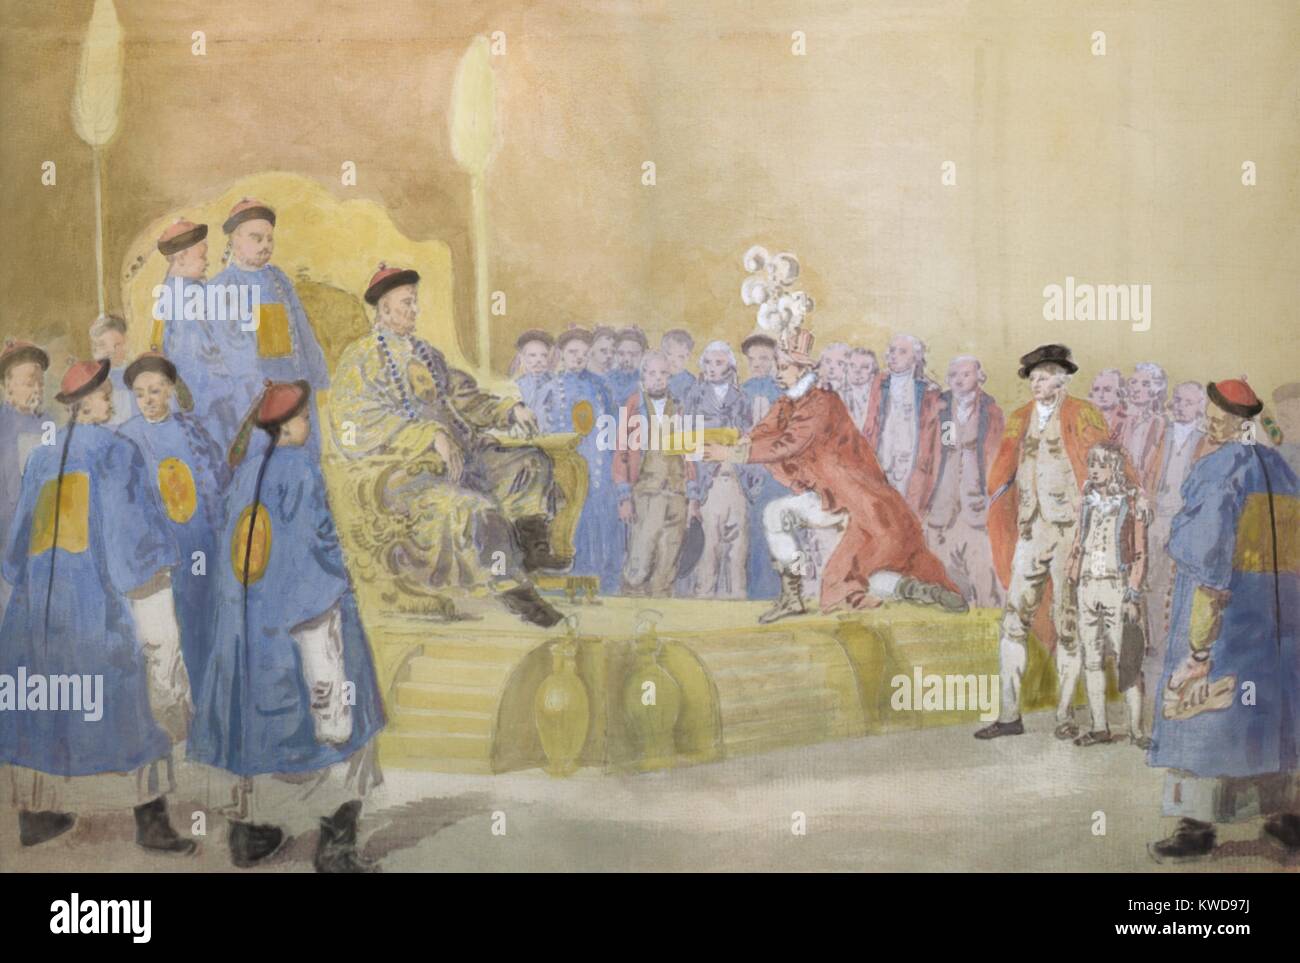 British Ambassador George MacCartney kneeling before the Qianlong Emperor of China, Sept 14, 1793. Standing behind the Emperor is Viceroy Liang Kentang and the future Jiaqing Emperor. To MacCartney's left are George Staunton and his Chinese speaking son, (BSLOC_2016_9_1)DUPLICATE REMOVED: SHOULD HAVE BEEN "7 Continents History", AS PER Barbara Schultz - DD Stock Photo